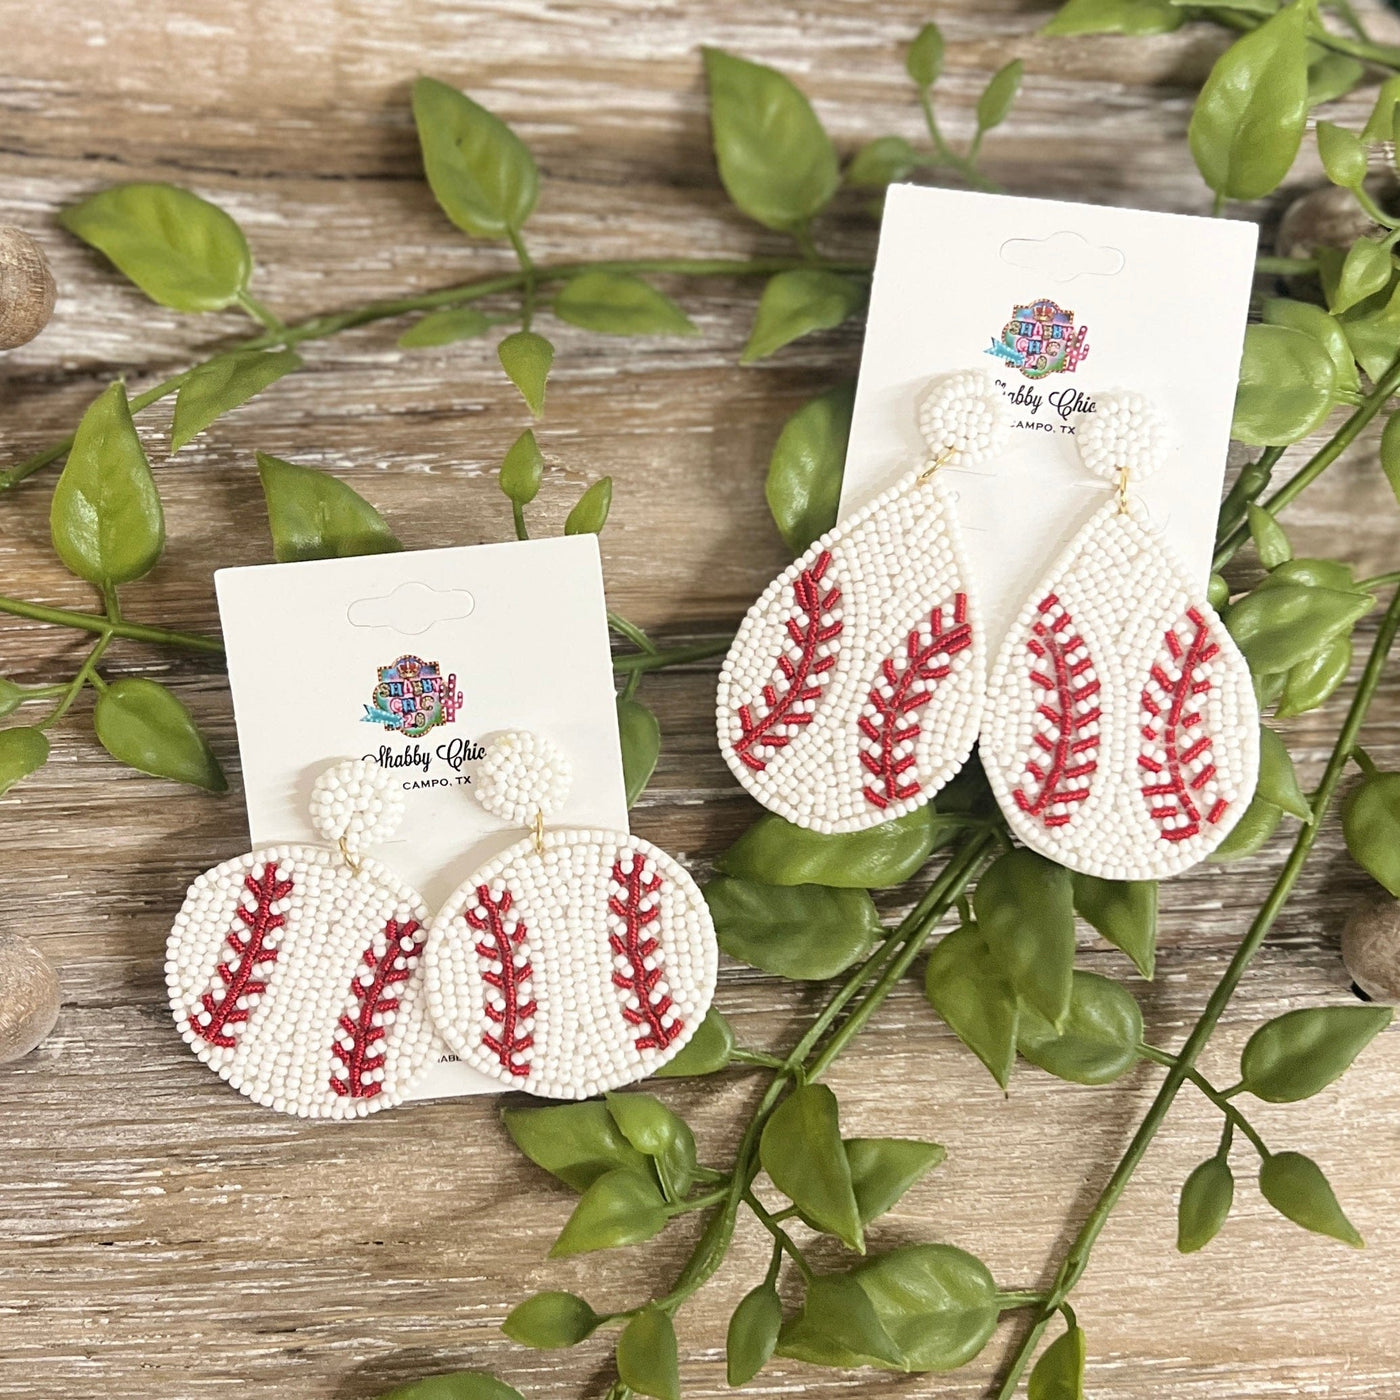 Beaded Baseball Earrings Shabby Chic Boutique and Tanning Salon